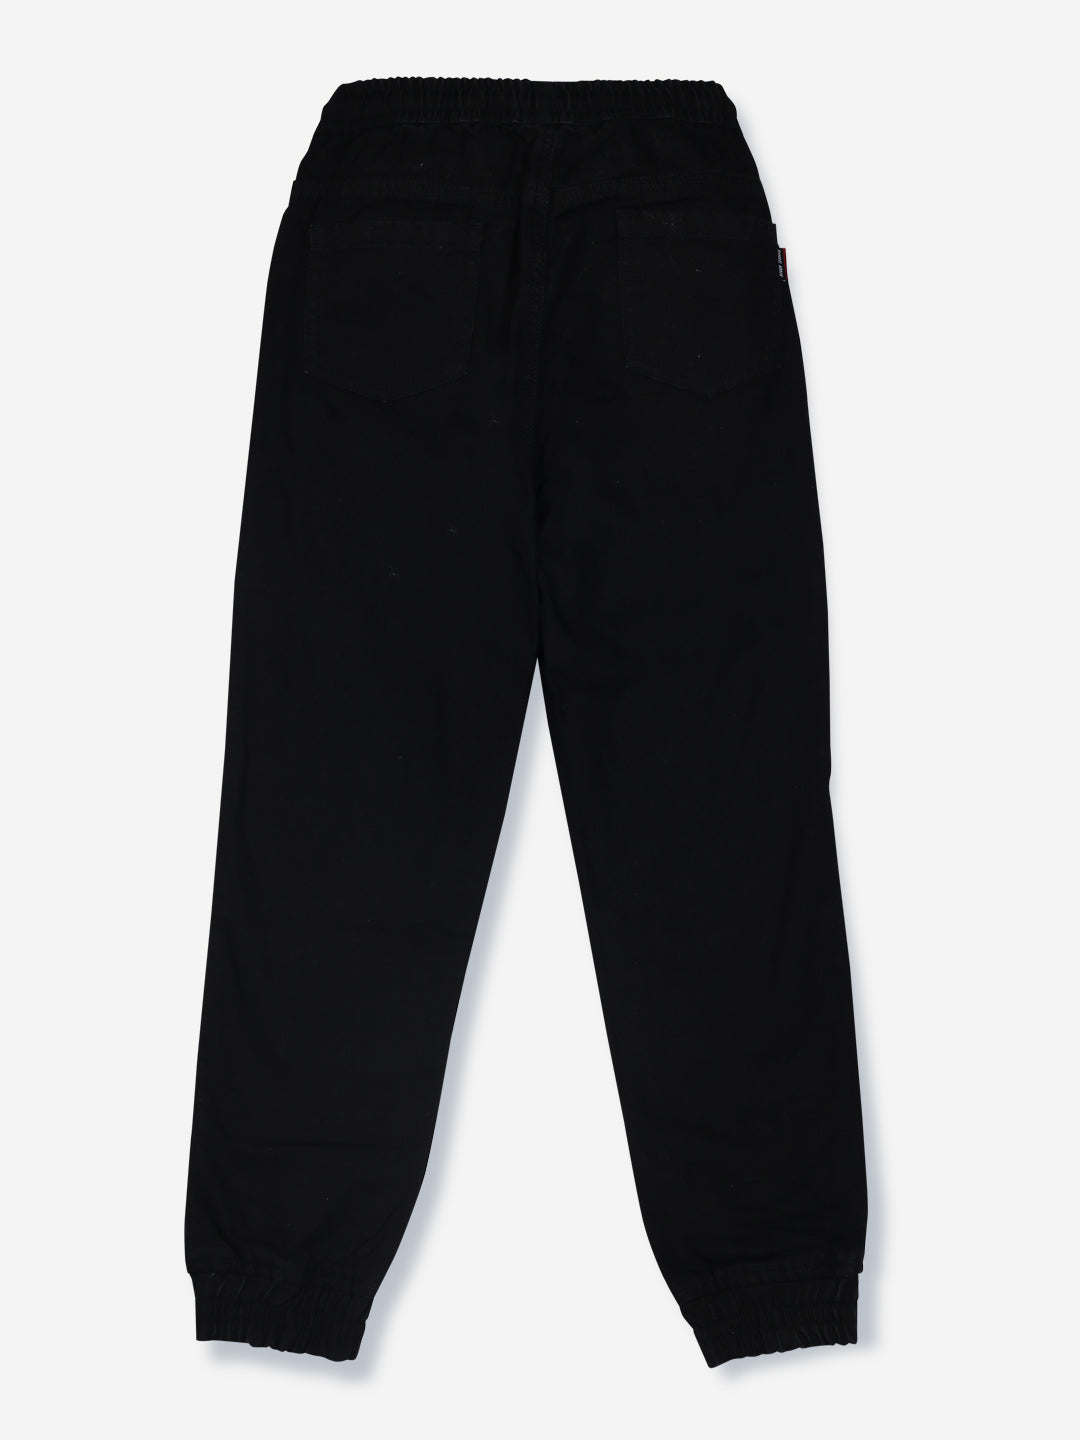 Boys Black Solid Woven Jeans